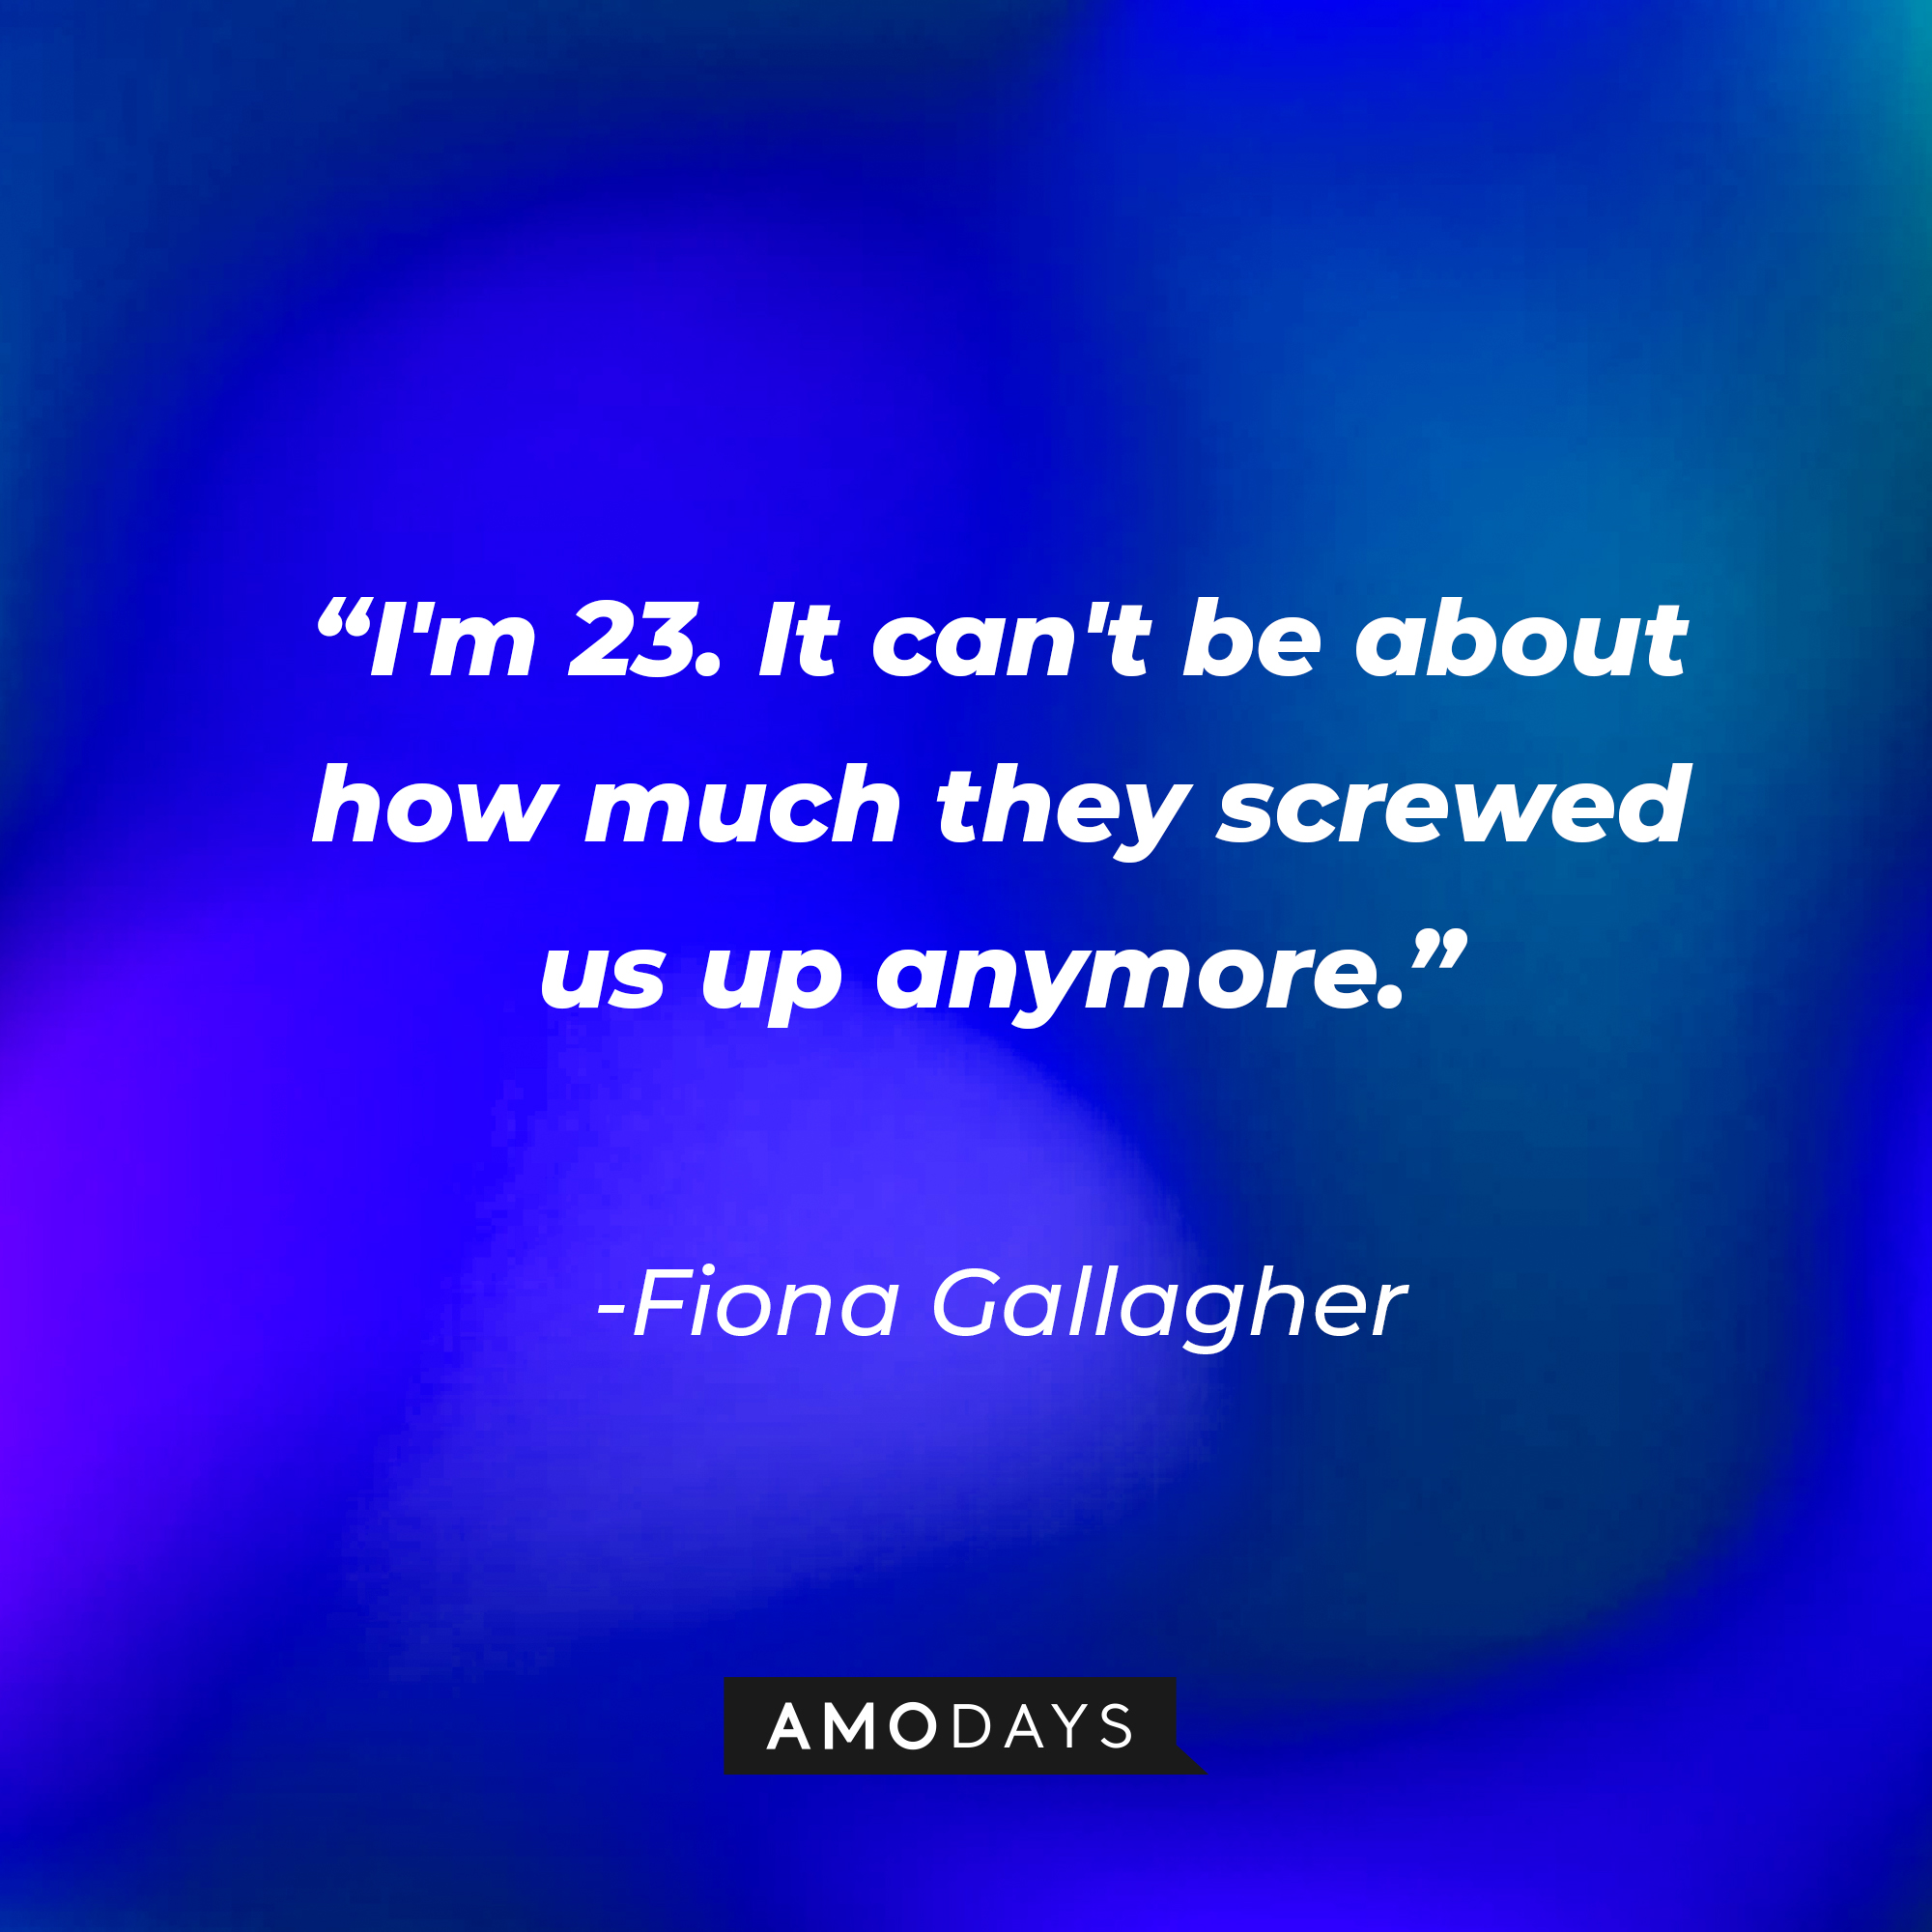 Fiona Gallagher’s quote: “I’m 23. It can’t be about how much they screwed us up anymore.” | Source: AmoDays